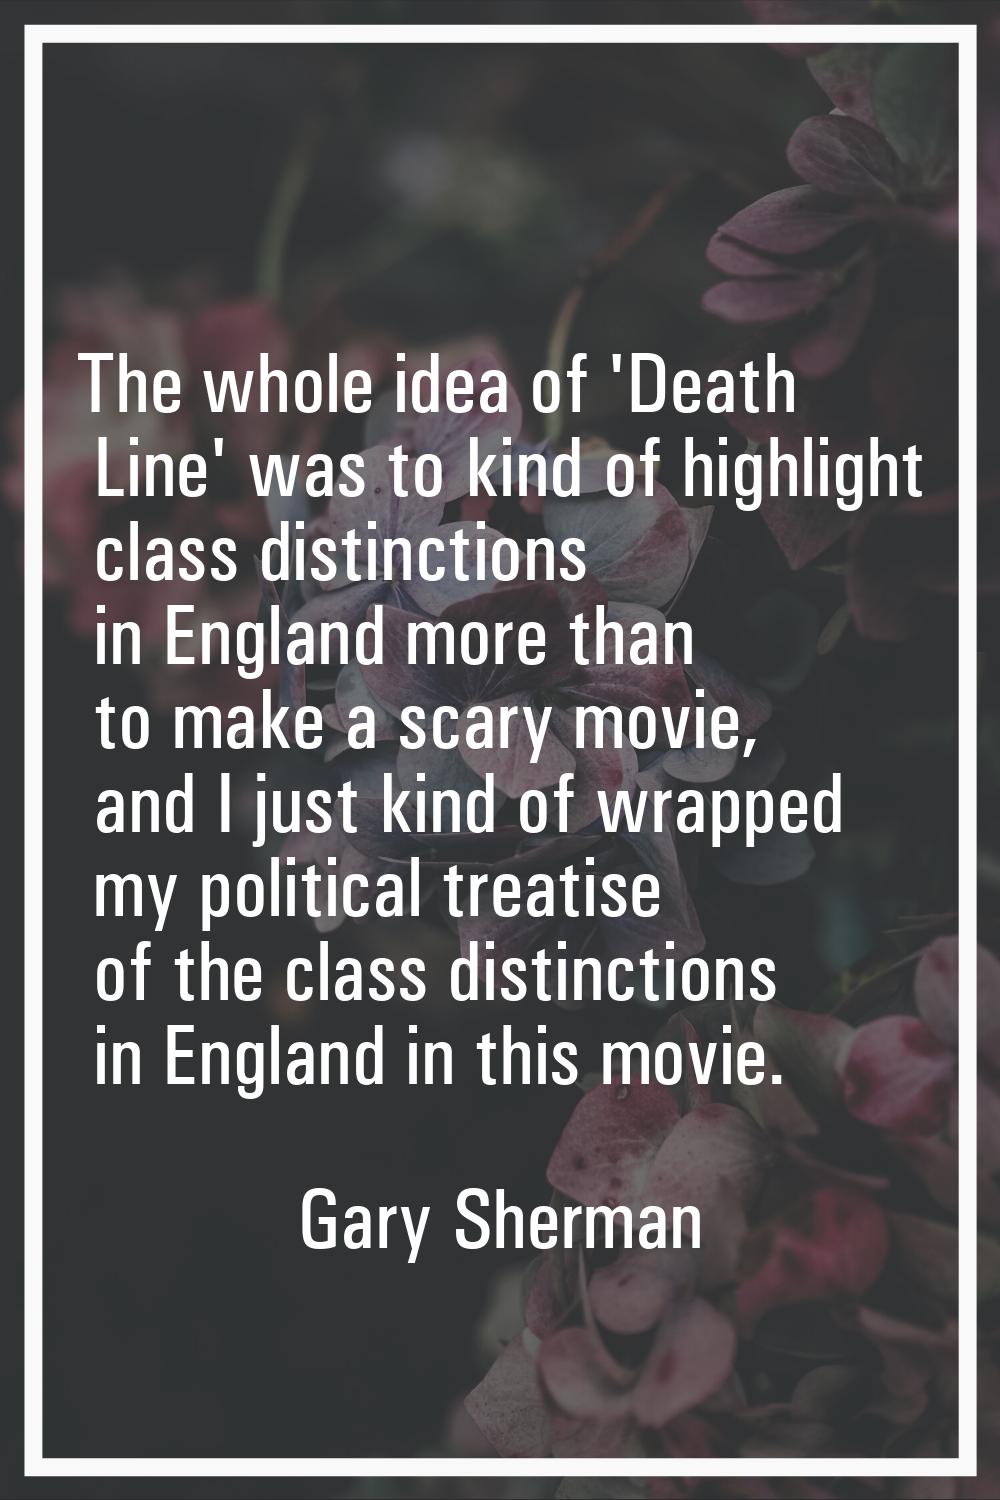 The whole idea of 'Death Line' was to kind of highlight class distinctions in England more than to 